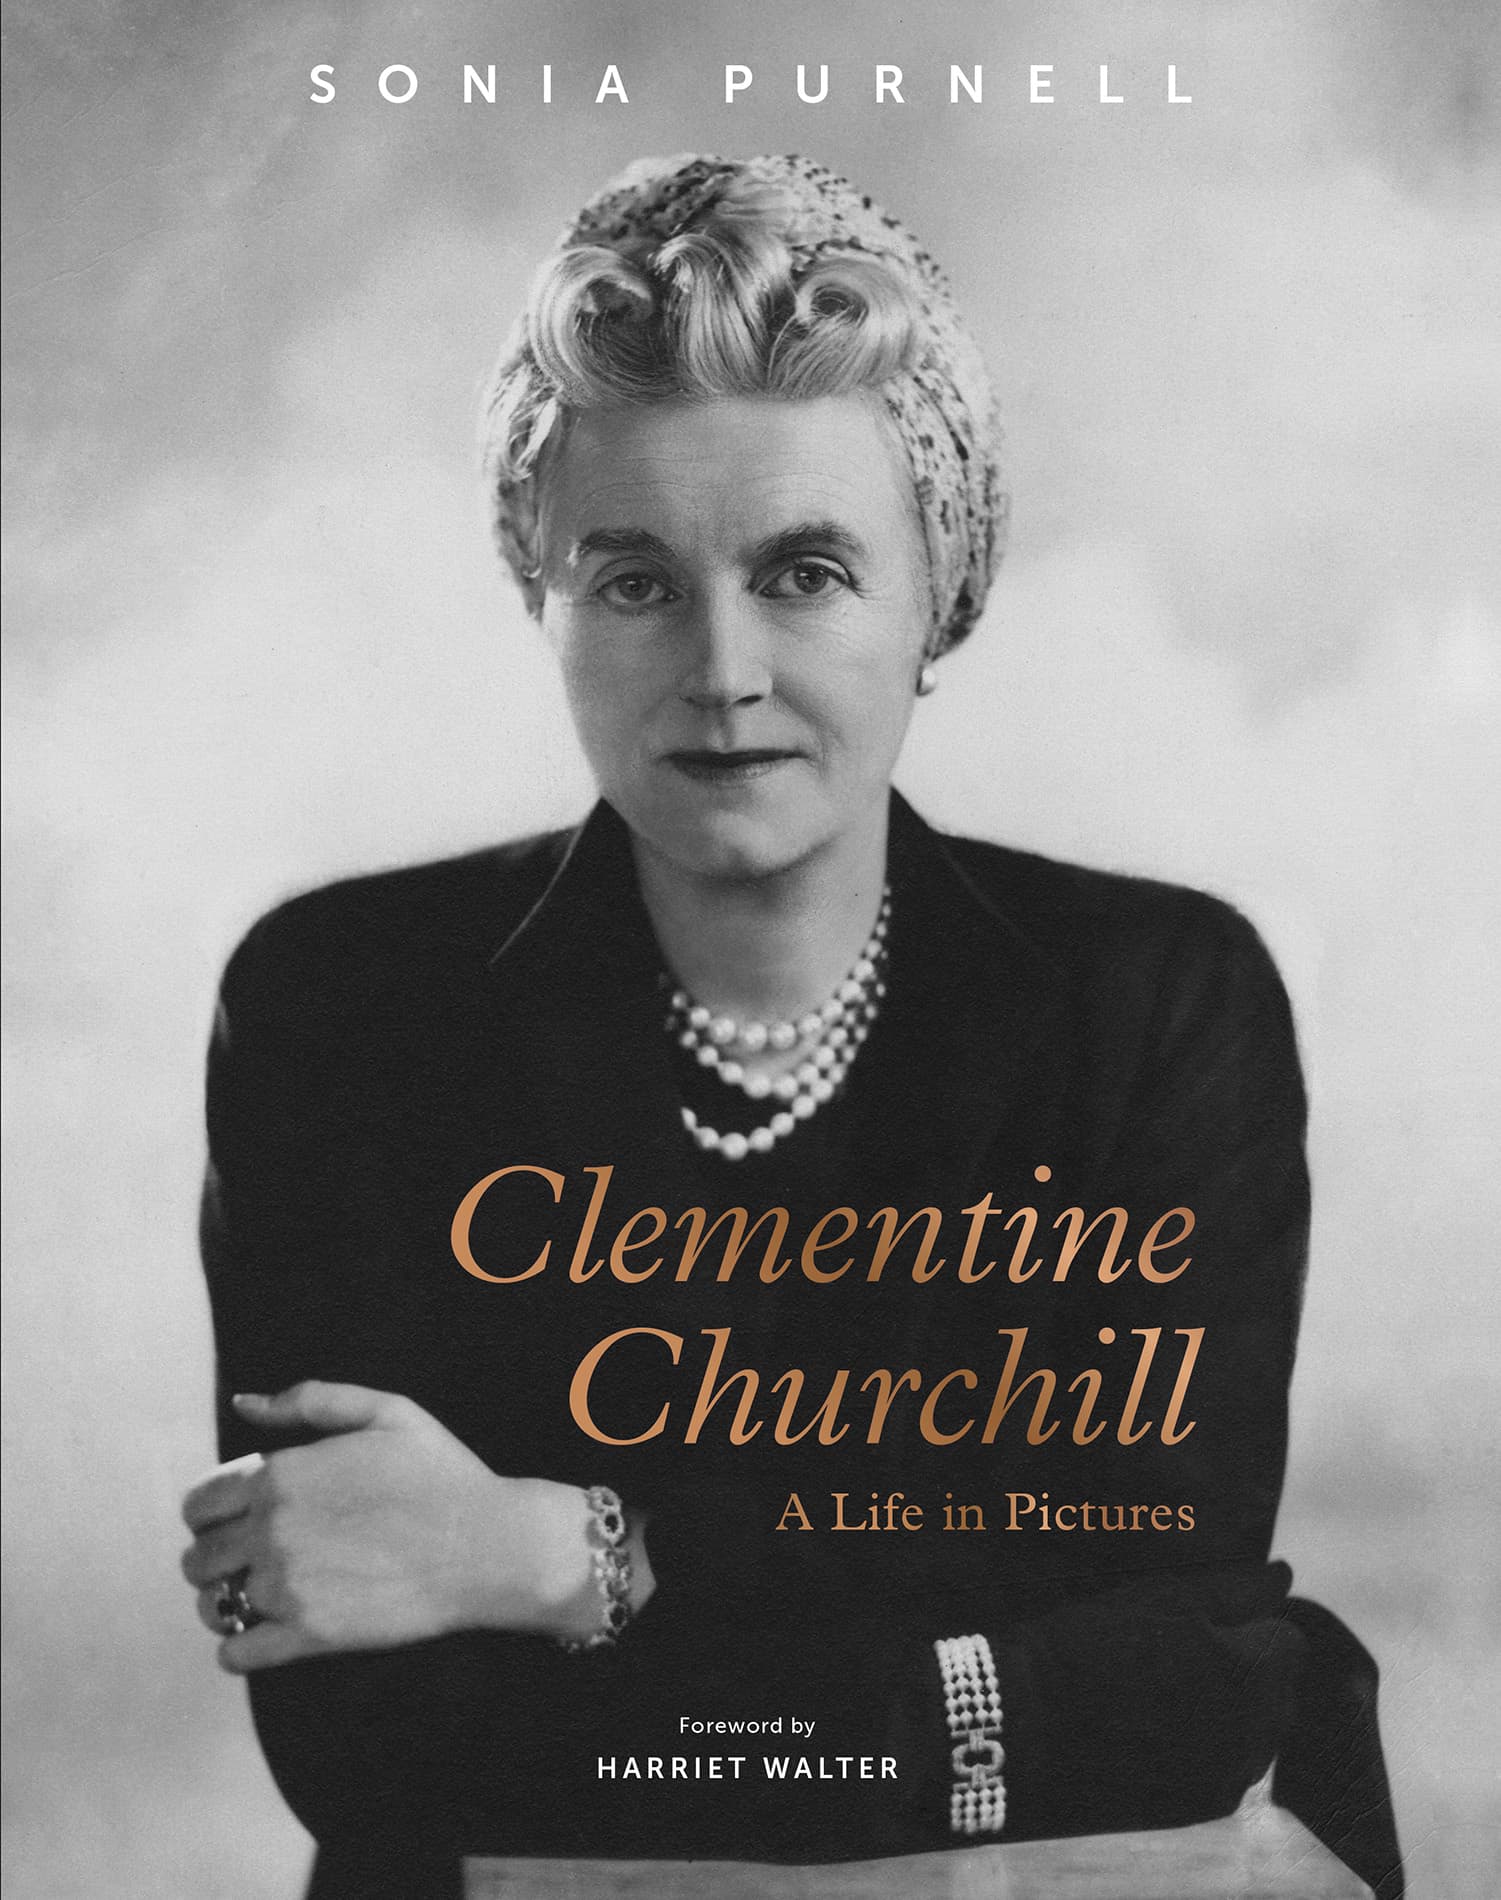 SONIA PURNELL Clementine Churchill A Life in Pictures For Jon Laurie and - photo 1